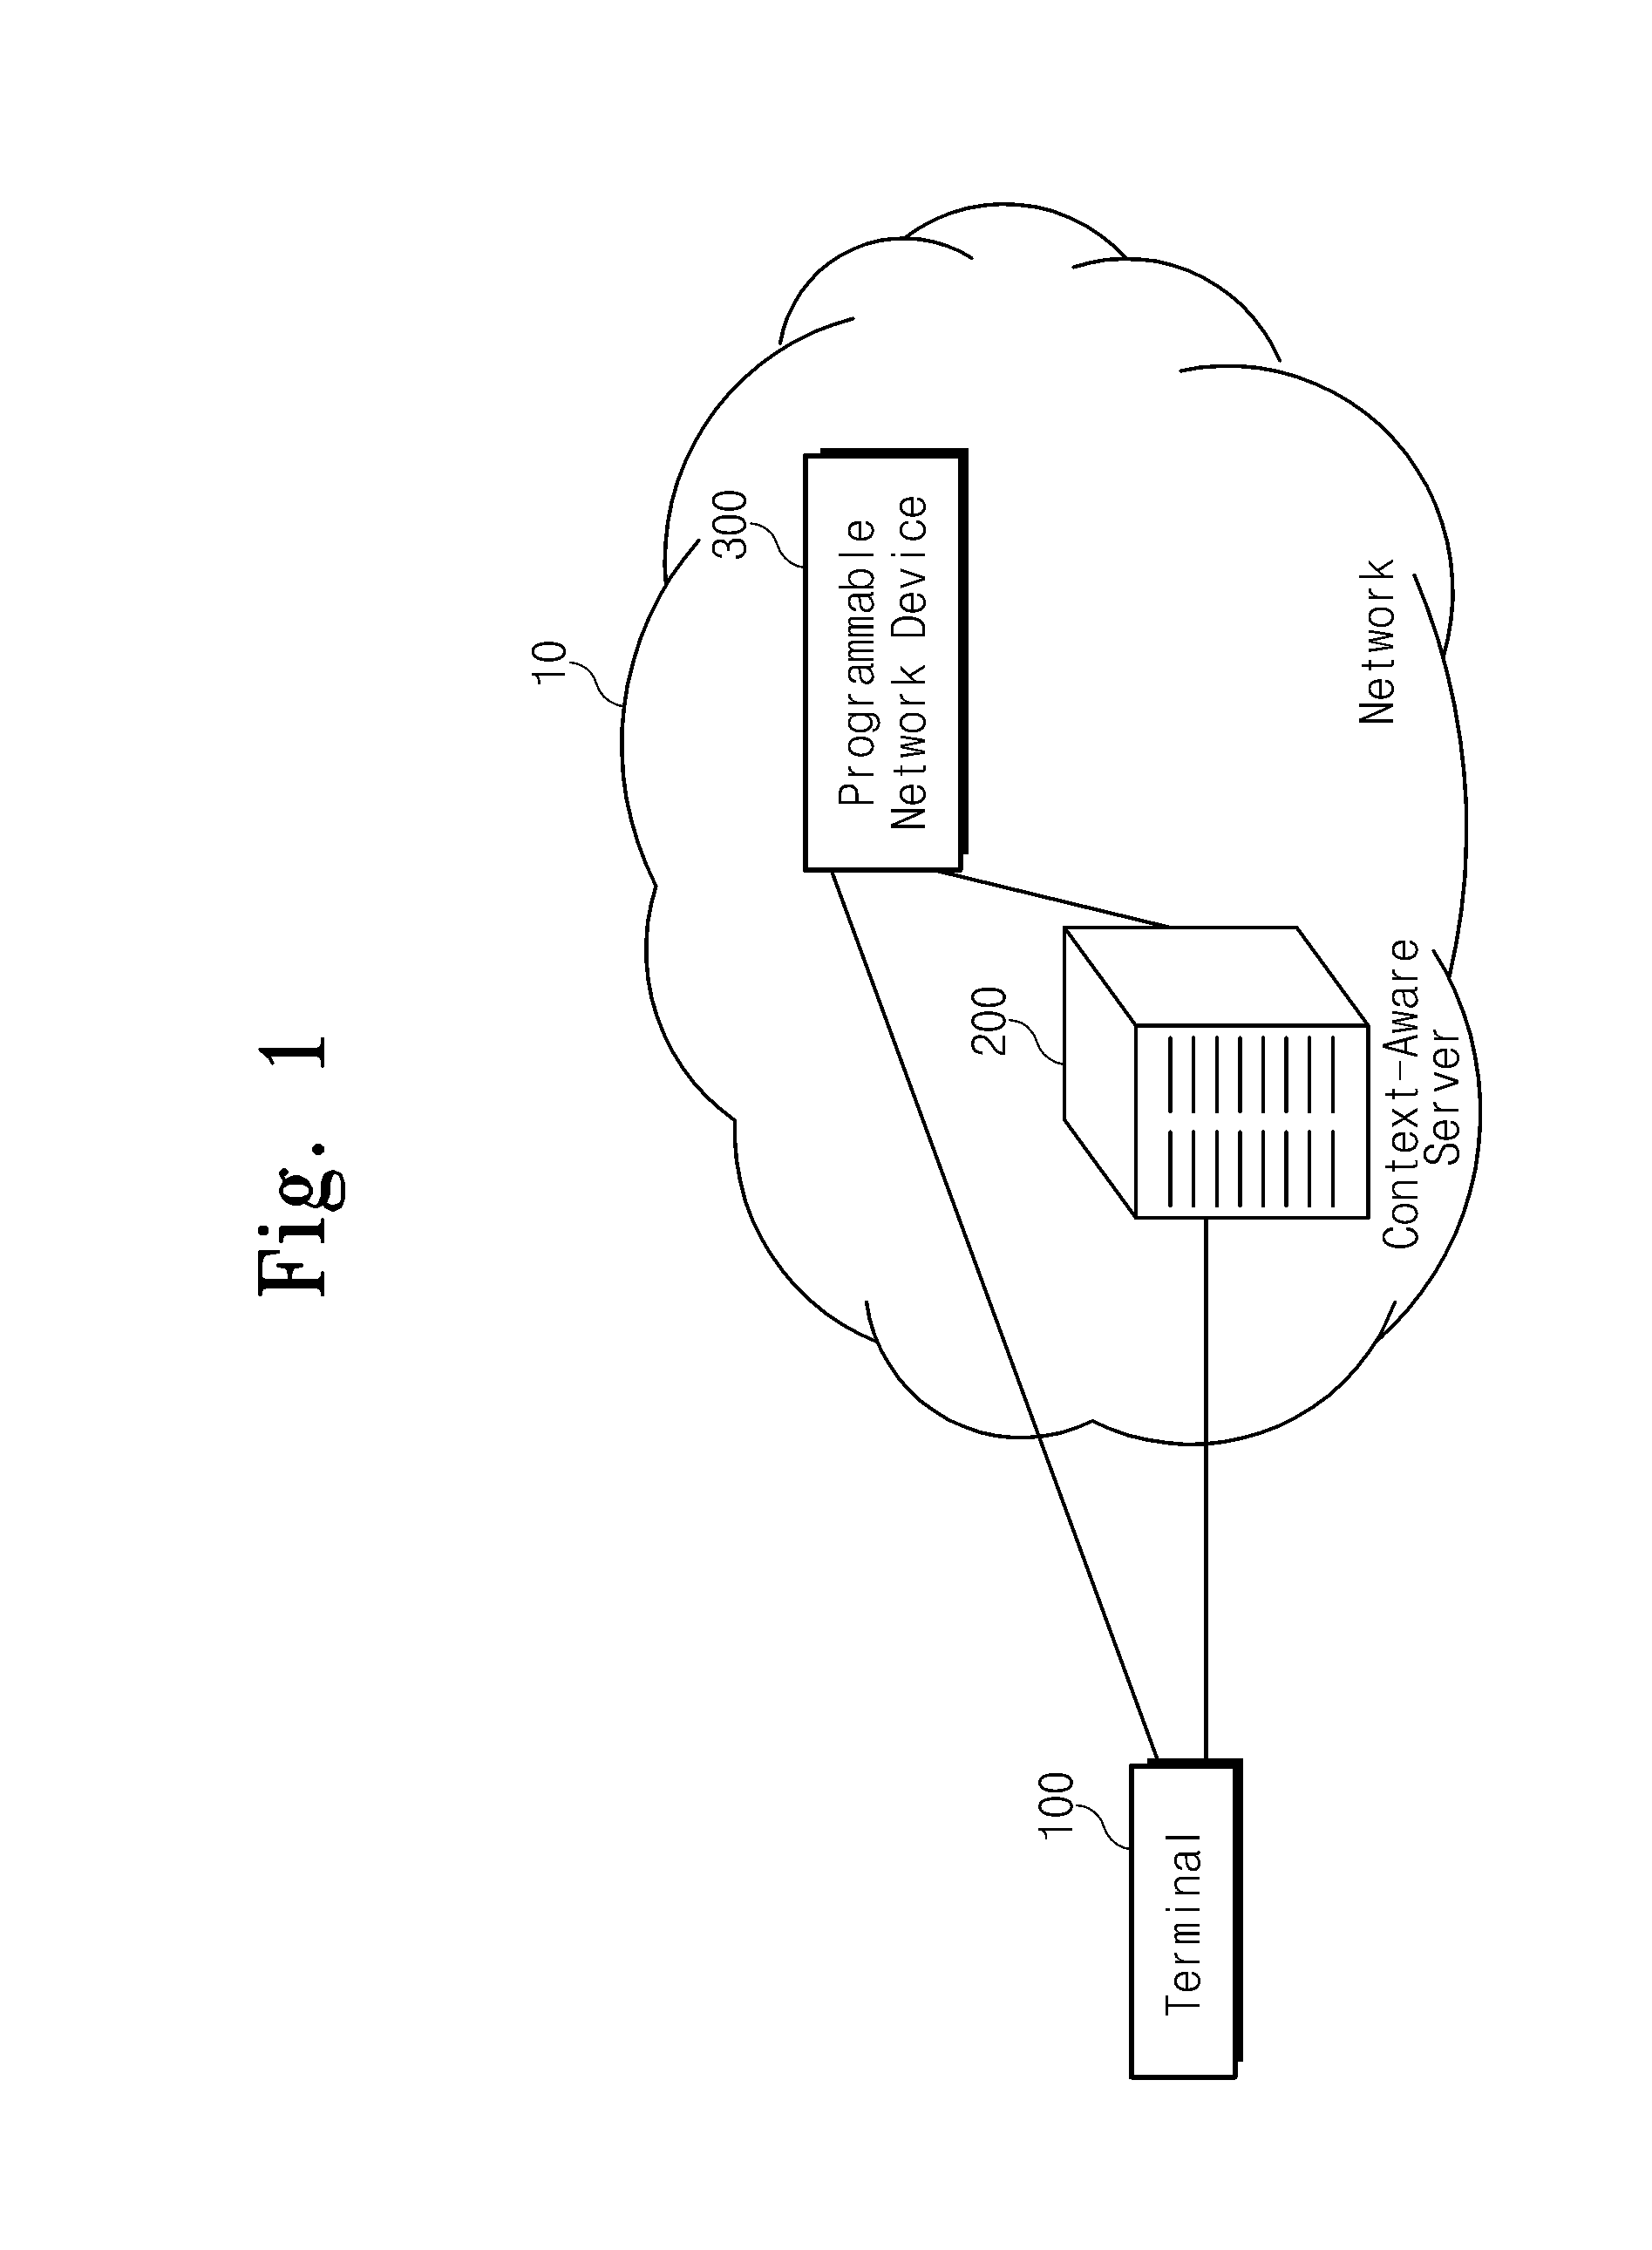 System and method for network virtualization